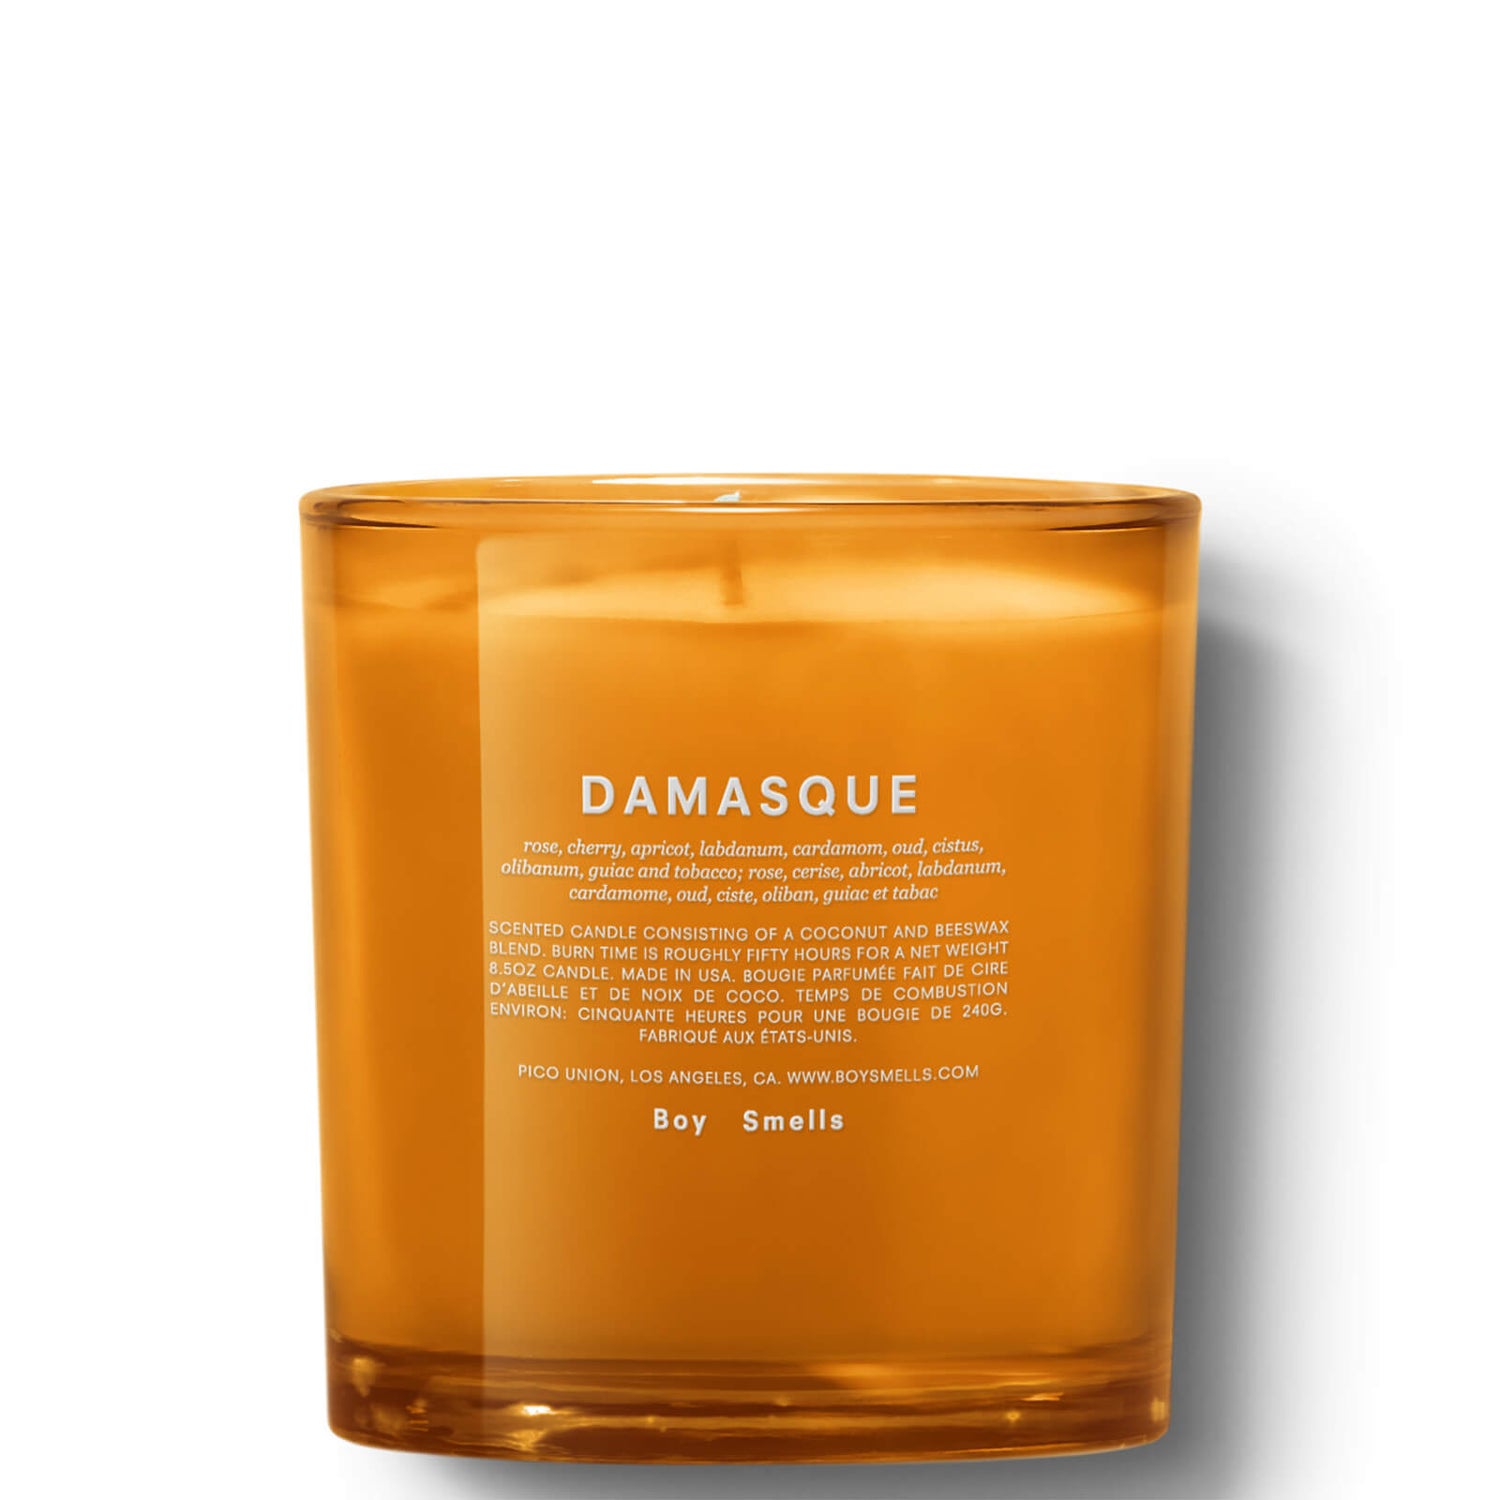 BOY SMELLS DAMASQUE CANDLE - Cult Beauty